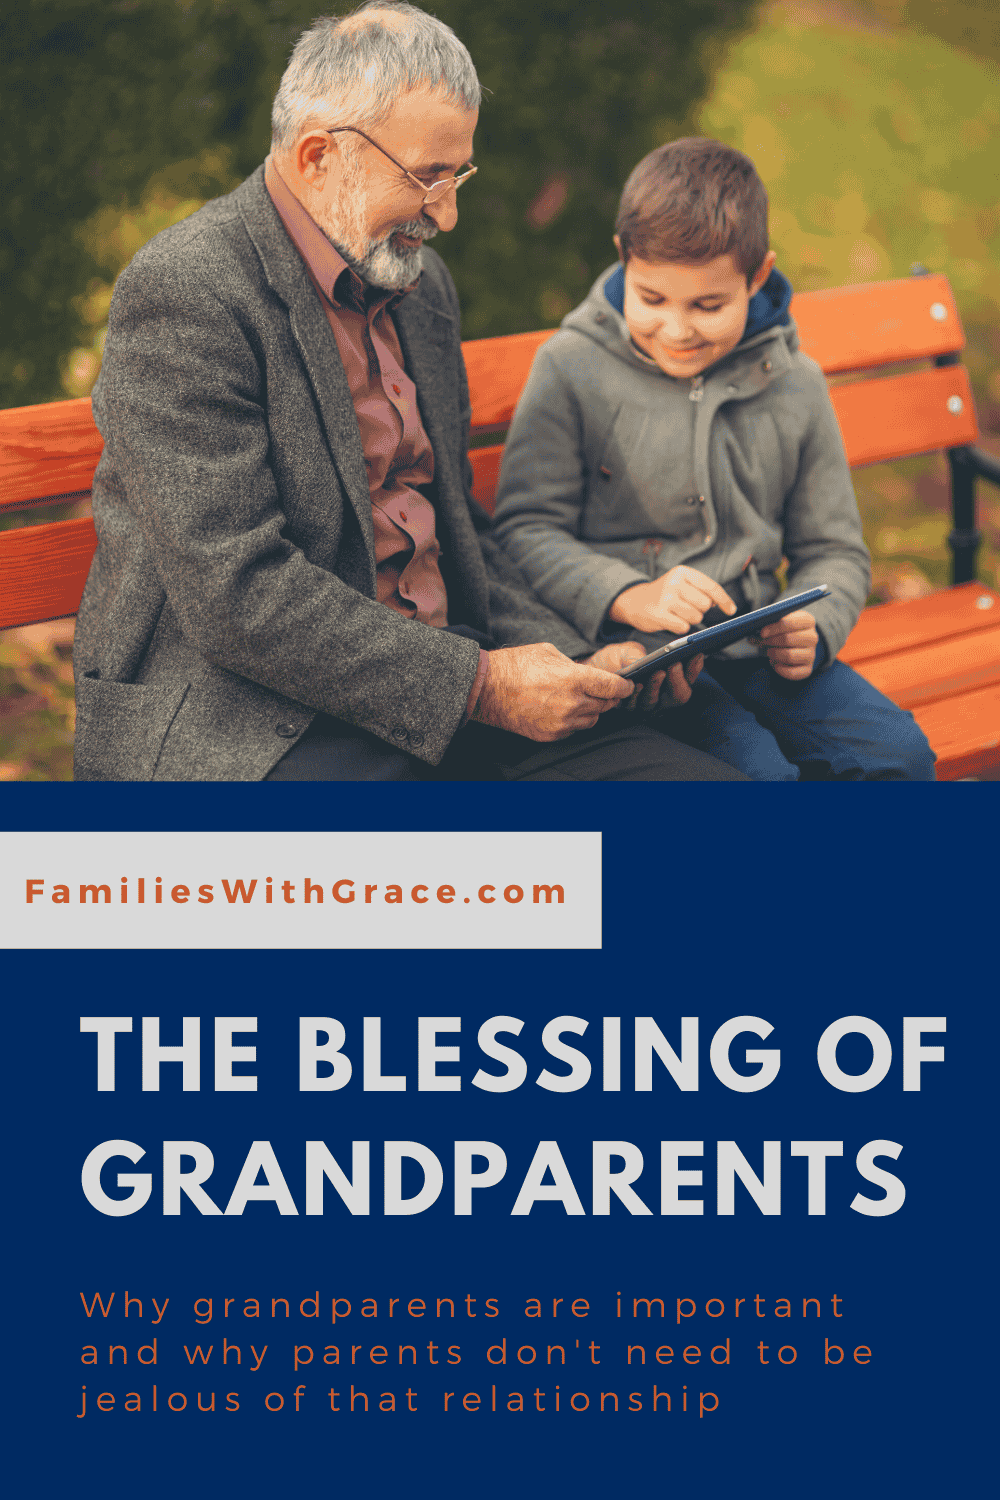 The blessing of grandparents